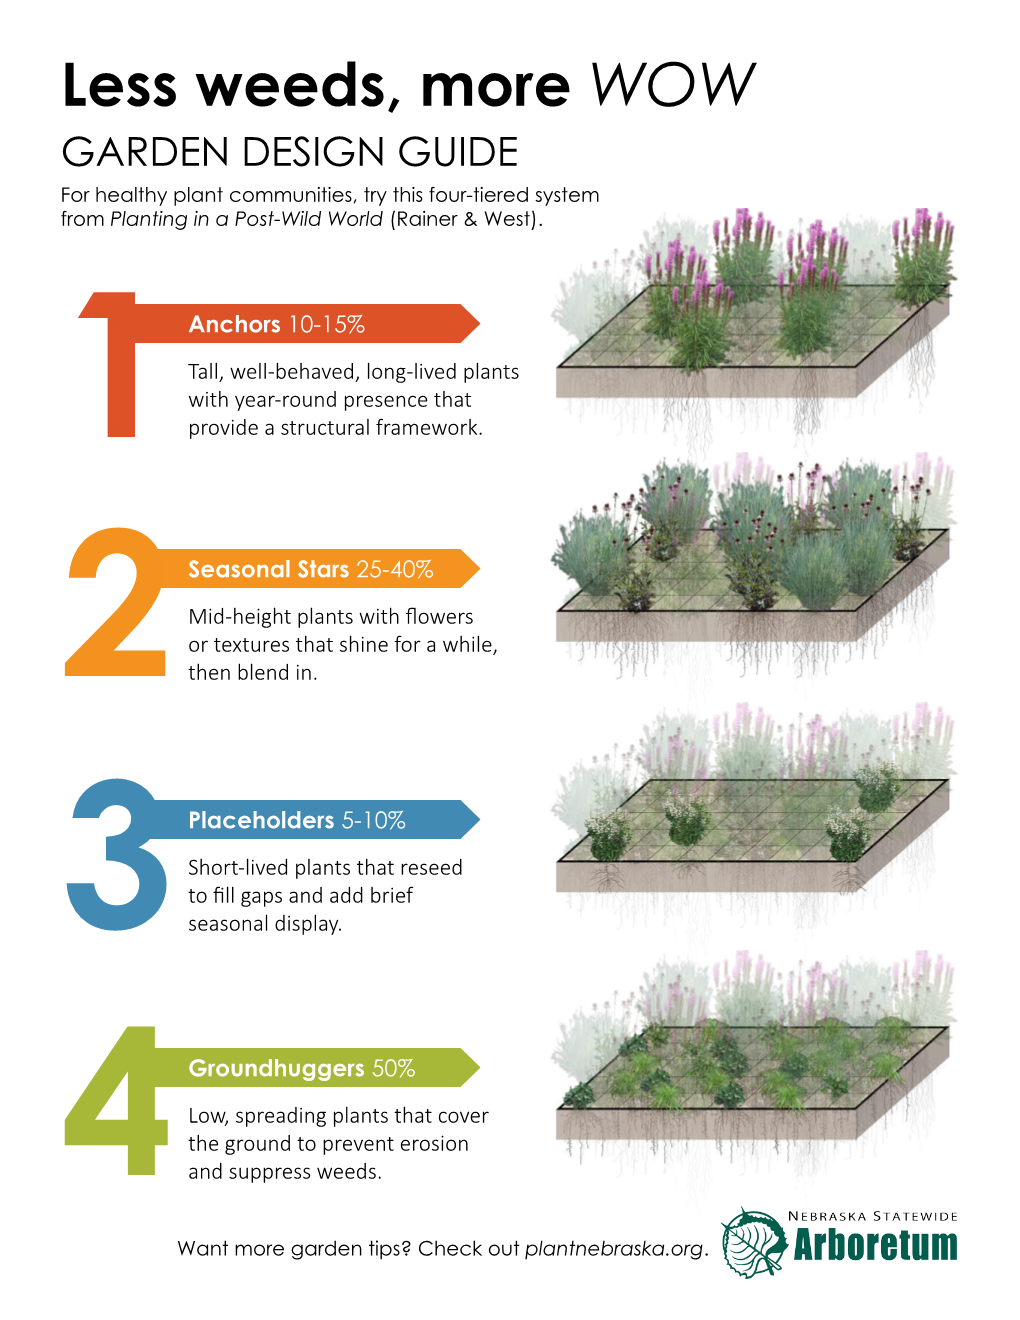 Less Weeds, More WOW GARDEN DESIGN GUIDE for Healthy Plant Communities, Try This Four-Tiered System from Planting in a Post-Wild World (Rainer & West)